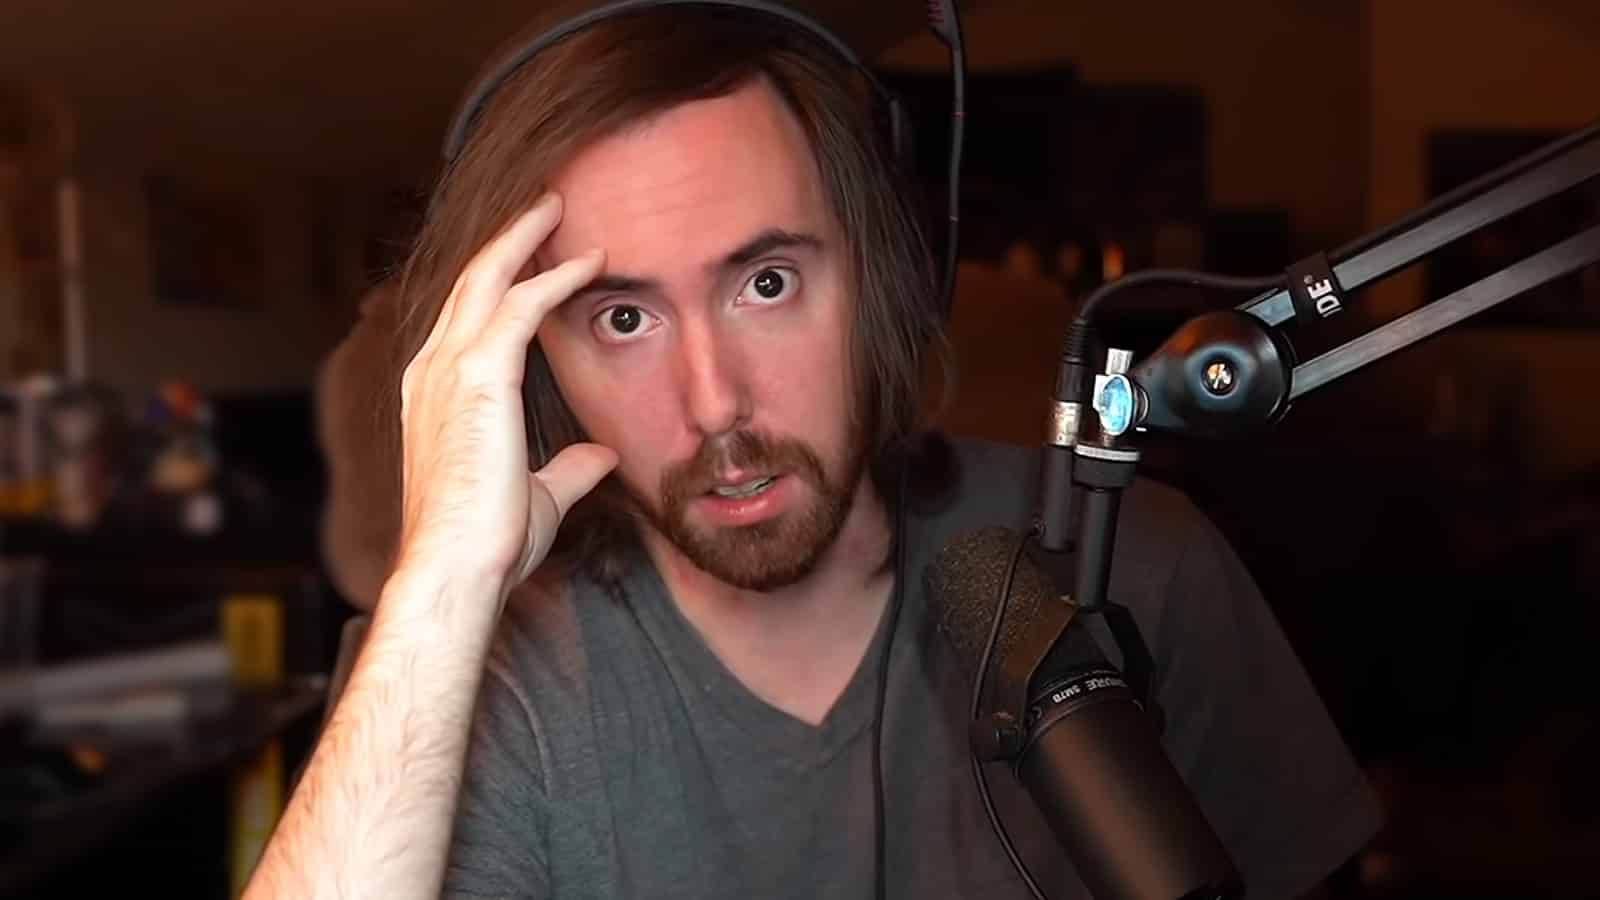 Asmongold staring into Twitch streaming camera.